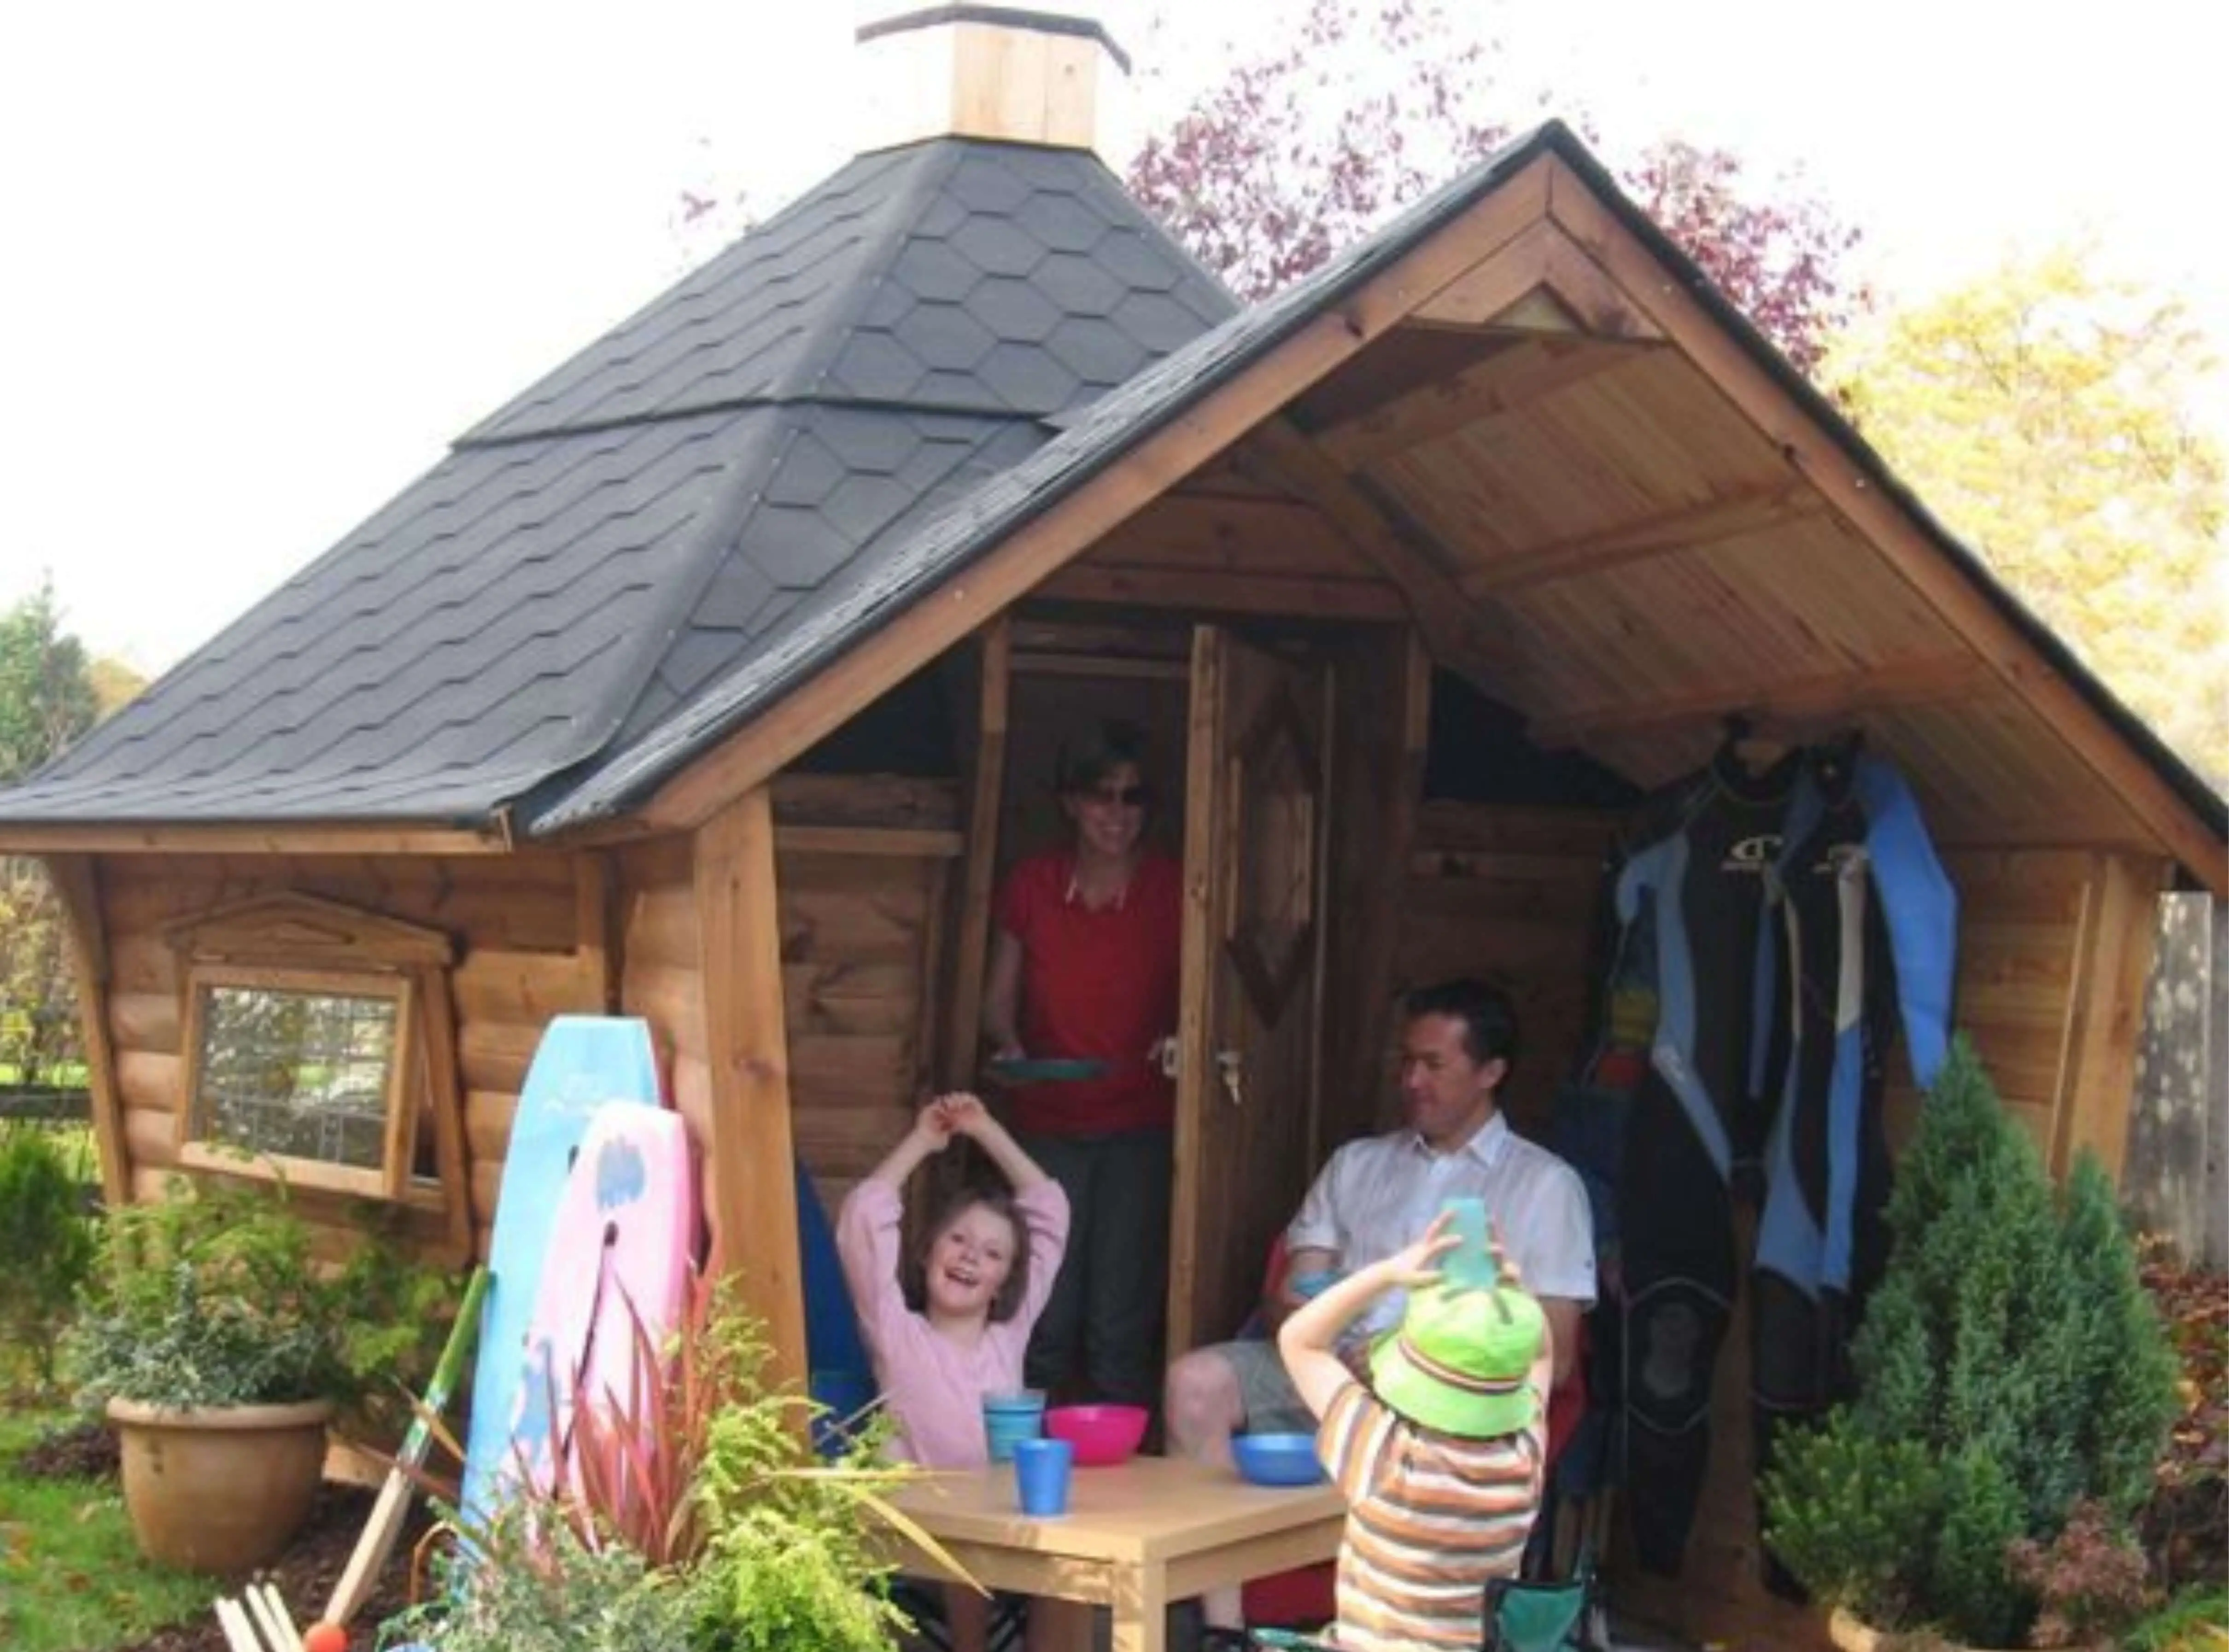 camping cabin with black roof tiles with family seated outside and plants and coats hanging on coat rack